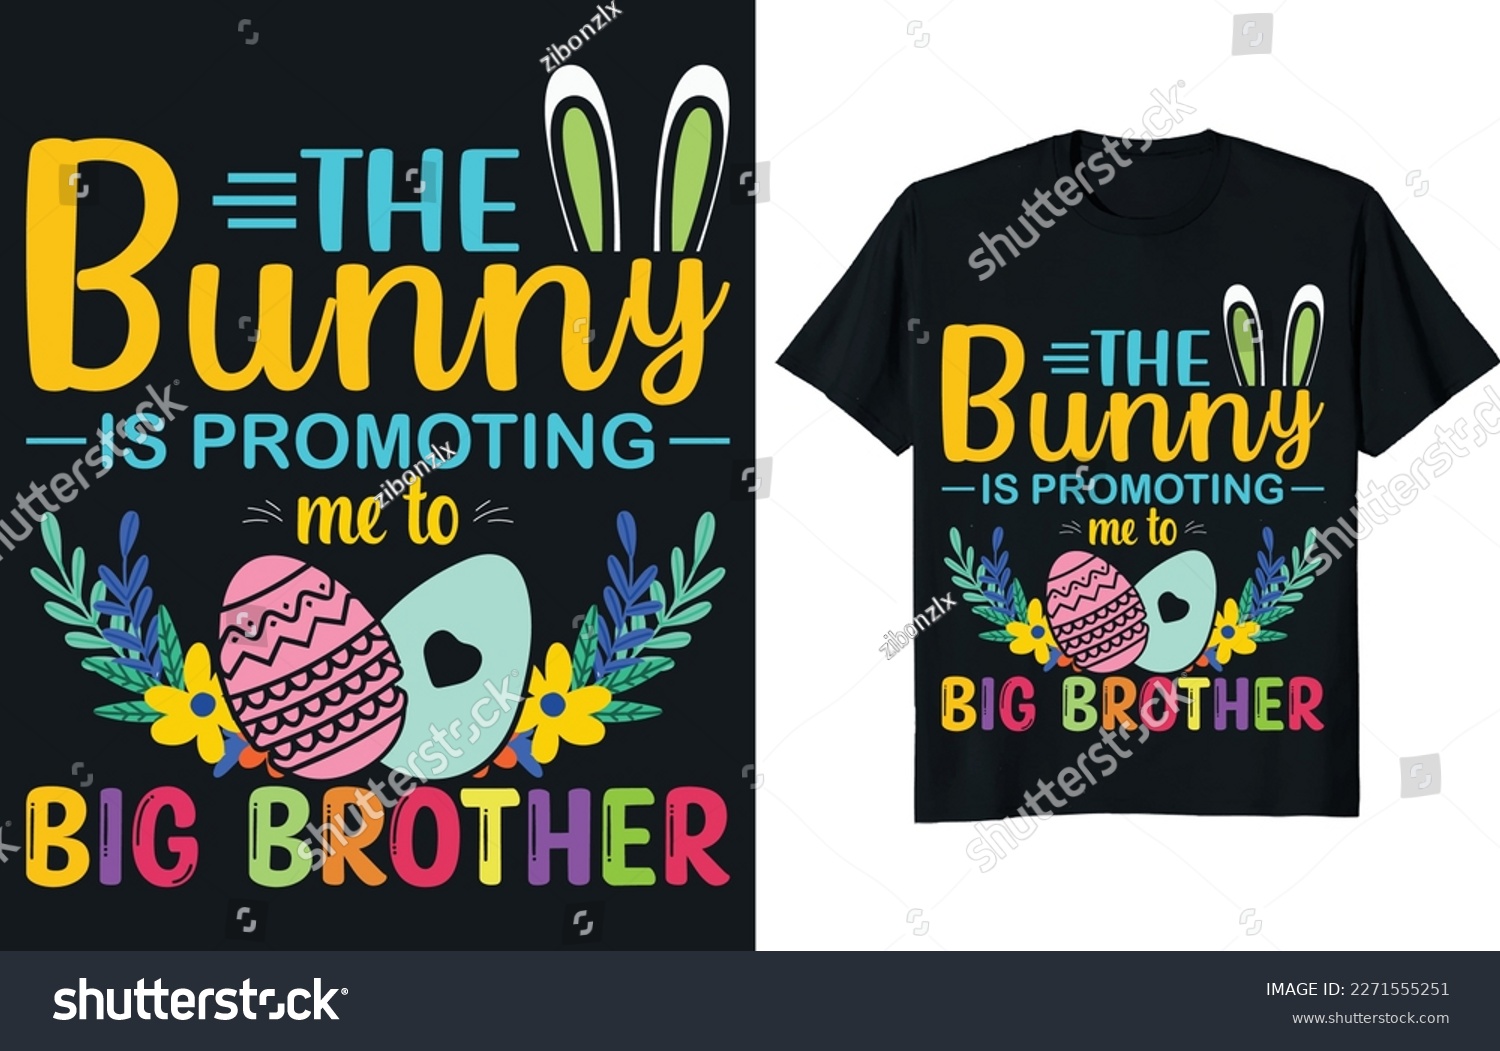 SVG of kids, April, easter bunny, easter decor, happy ester, finding eggs, ester day t-shirt designs, hand-drawn, font, cut file henry, easter bunny t-shirt, baby, festive, fortune, happiness, typography des svg